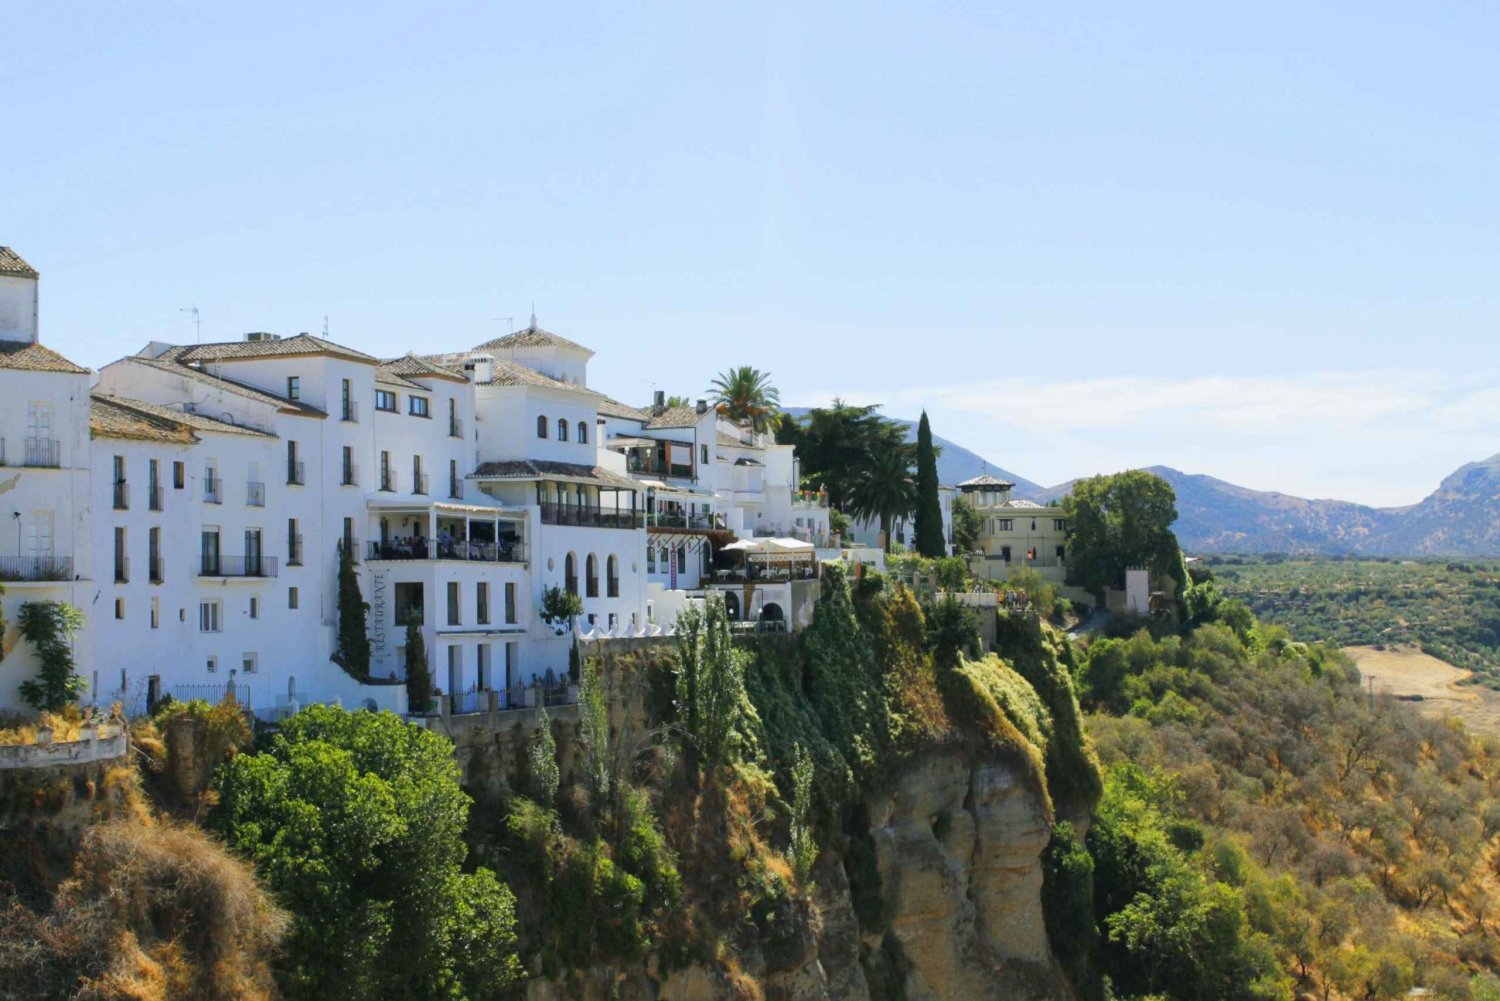 From Seville: Private Day Trip to Ronda and Malaga